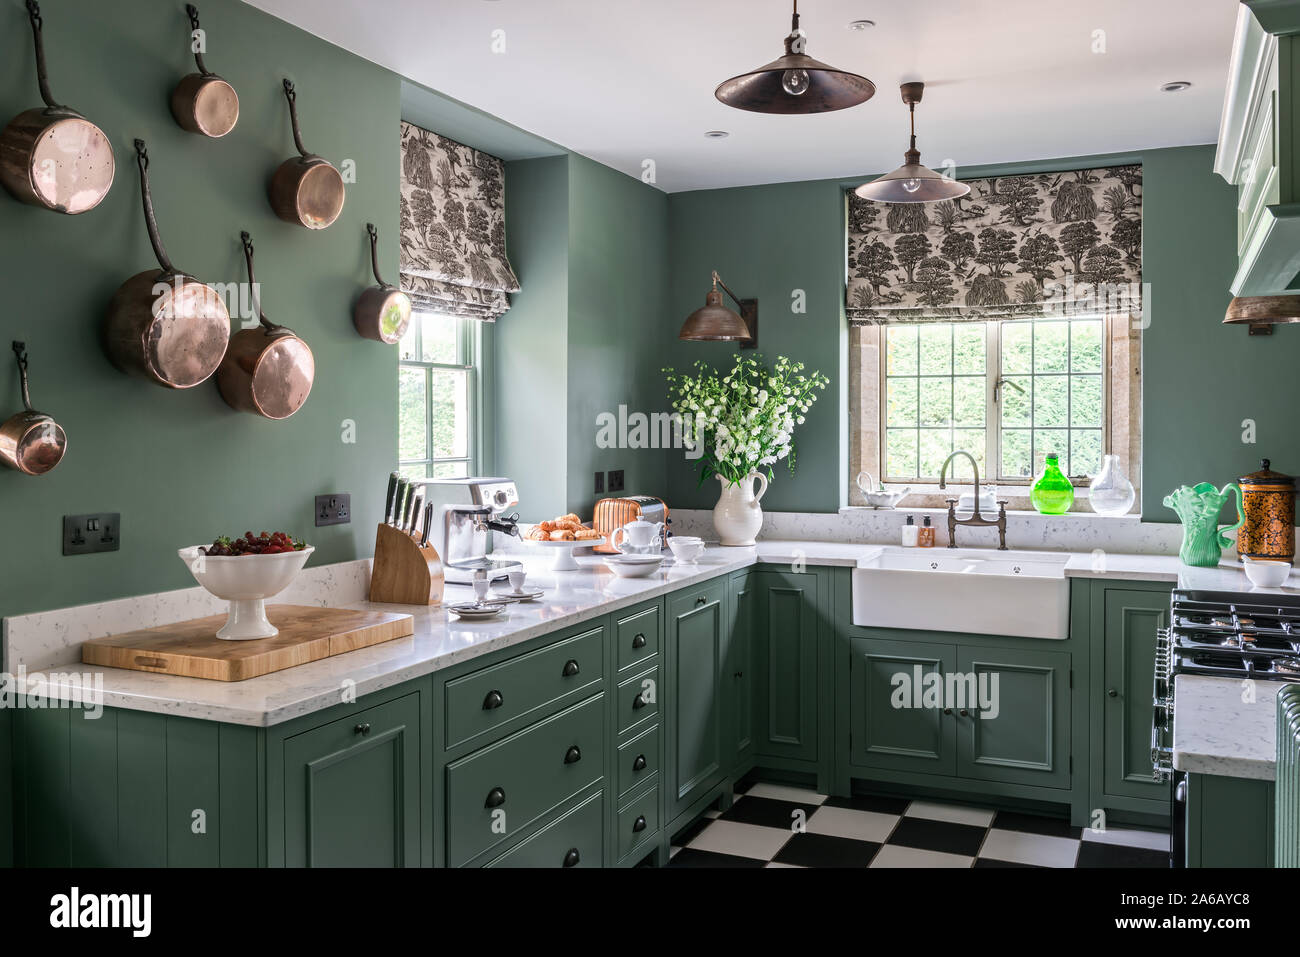 Green paintwork in 1930s Art Deco style kitchen with wall mounted copper pots Stock Photo